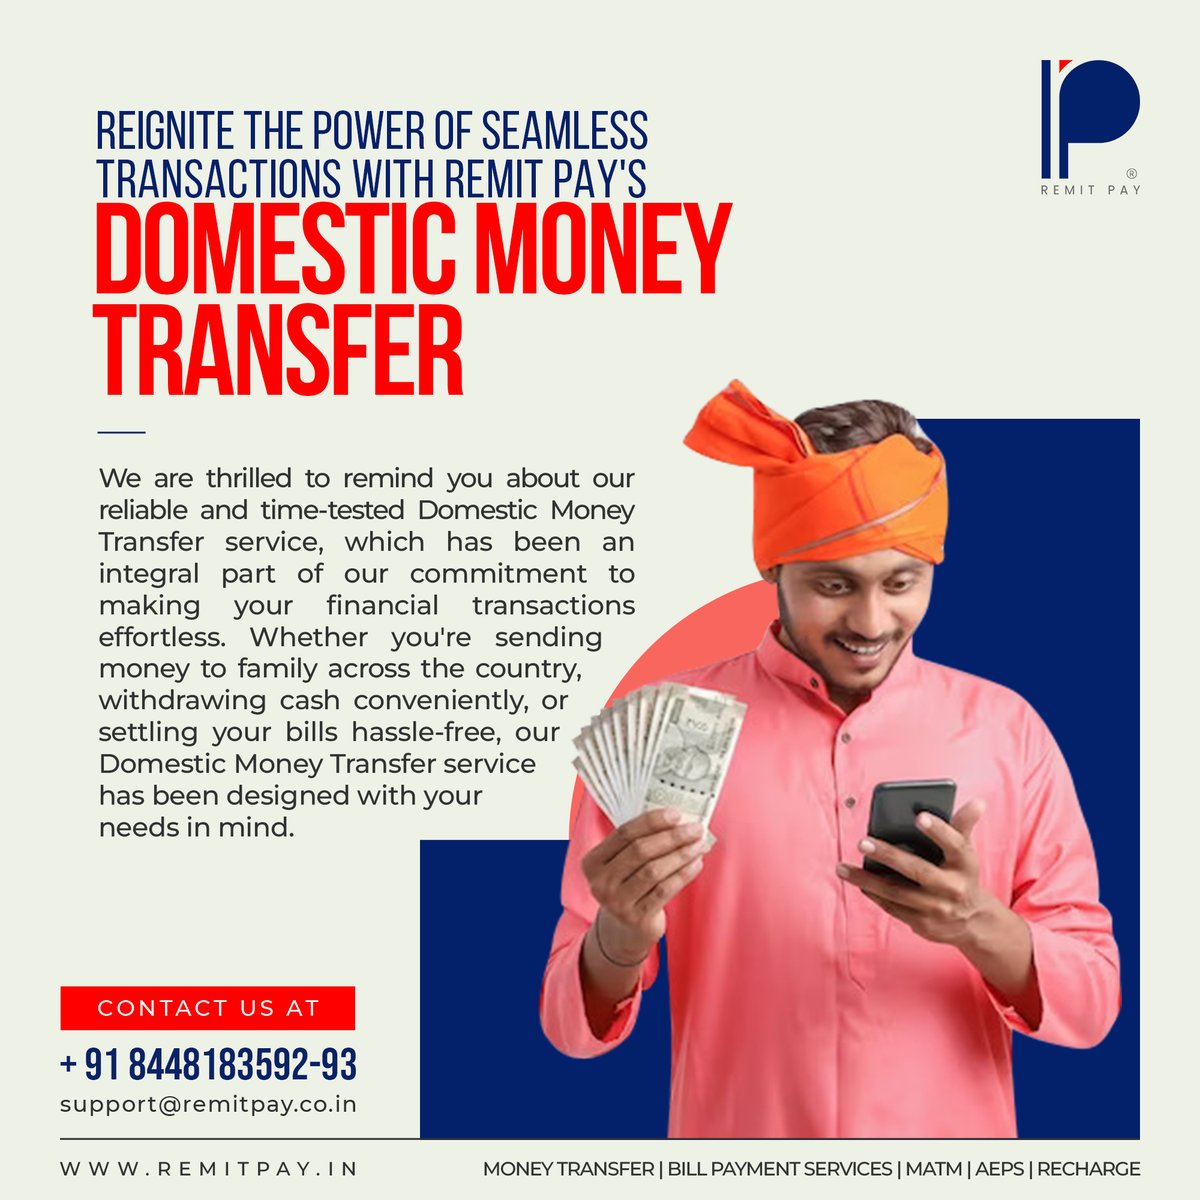 Domestic Money Transfer: Reignite the Power of Seamless Transactions with Remit Pay's

#money #moneytransfer #moneytransfer #moneytransfers #moneytransferservice #DomesticMoneyTransfer #domesticmoneytransfer #finance #financial #transaction #transactions #effortless #commitment